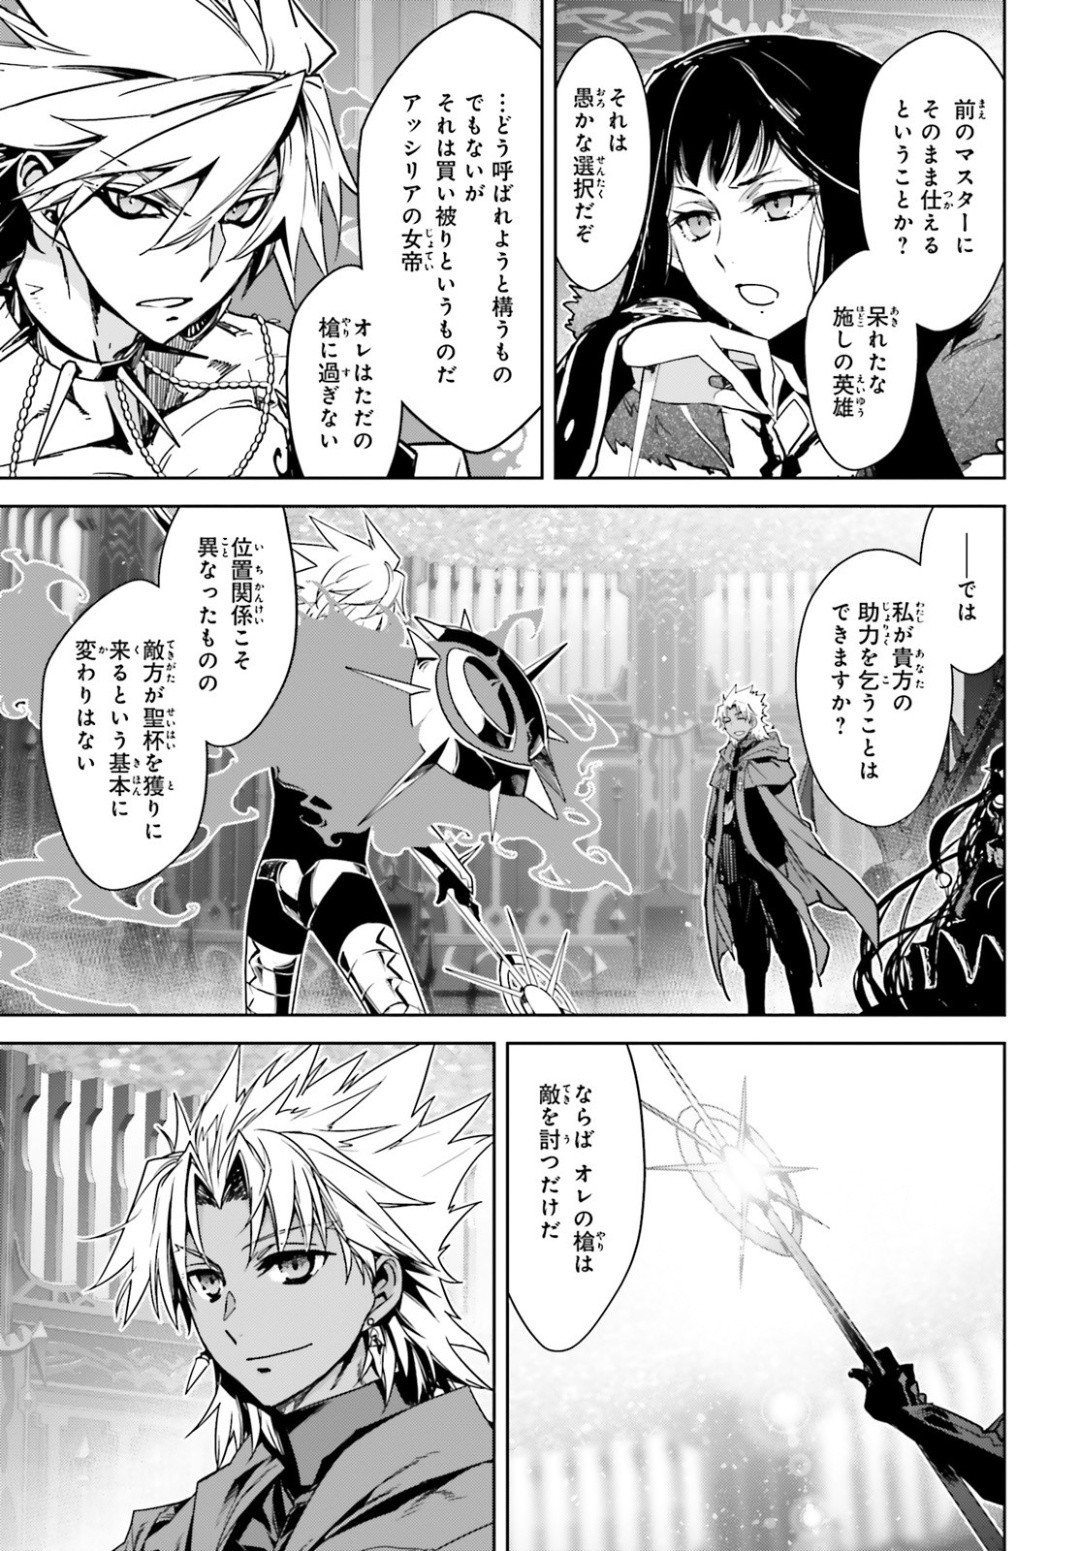 Fate-Apocrypha - Chapter 38 - Page 14